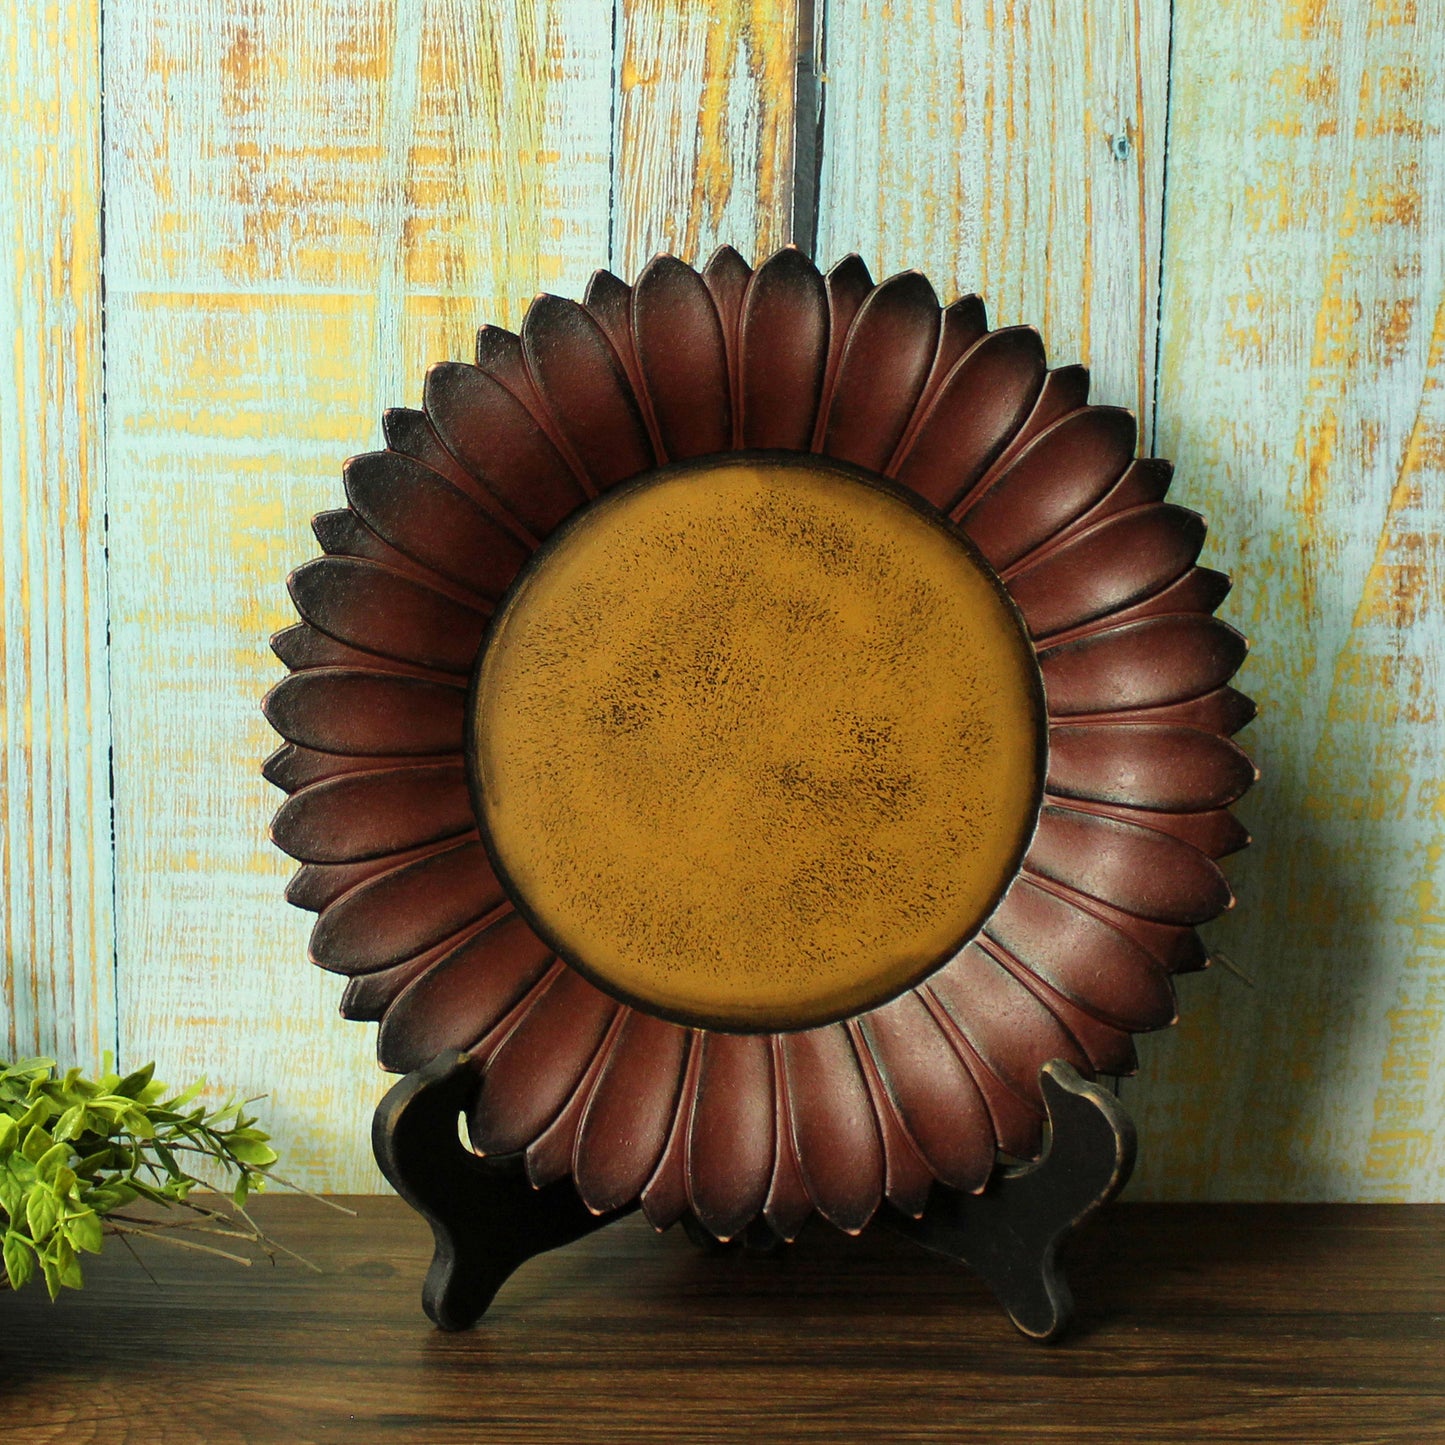 CVHOMEDECO. Sunflower Plate with Rack Country Vintage Display Wooden Plate Home and Office Décor Art, 11 Inch